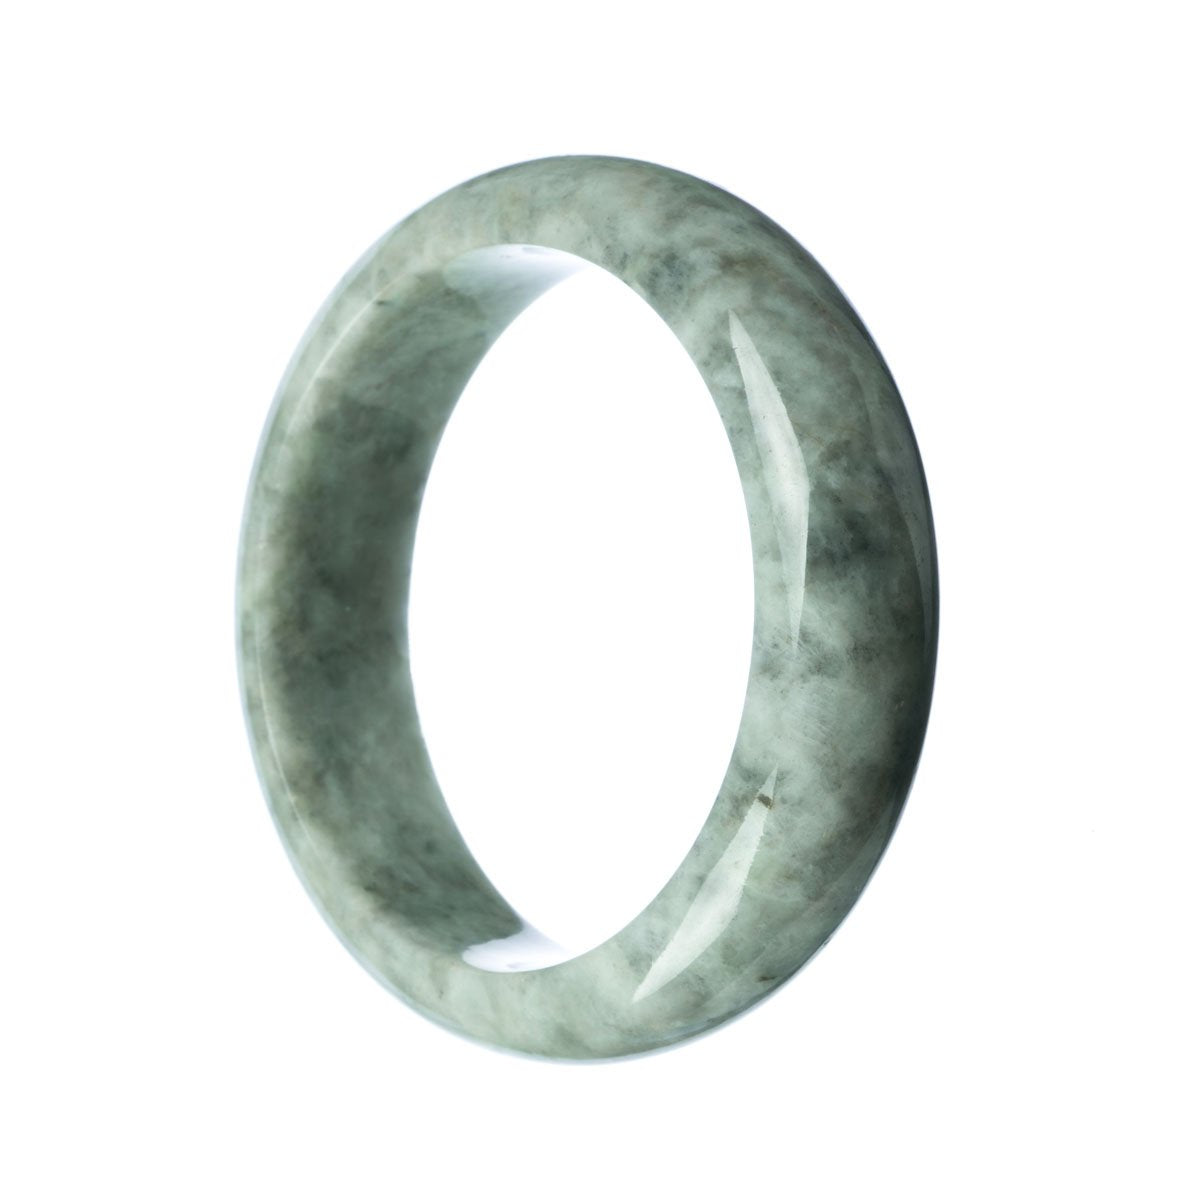 A close-up photo of a jade bracelet with a half-moon shape. The bracelet is made of genuine Type A Grey Burma Jade and measures 62mm in diameter. It is designed by MAYS.